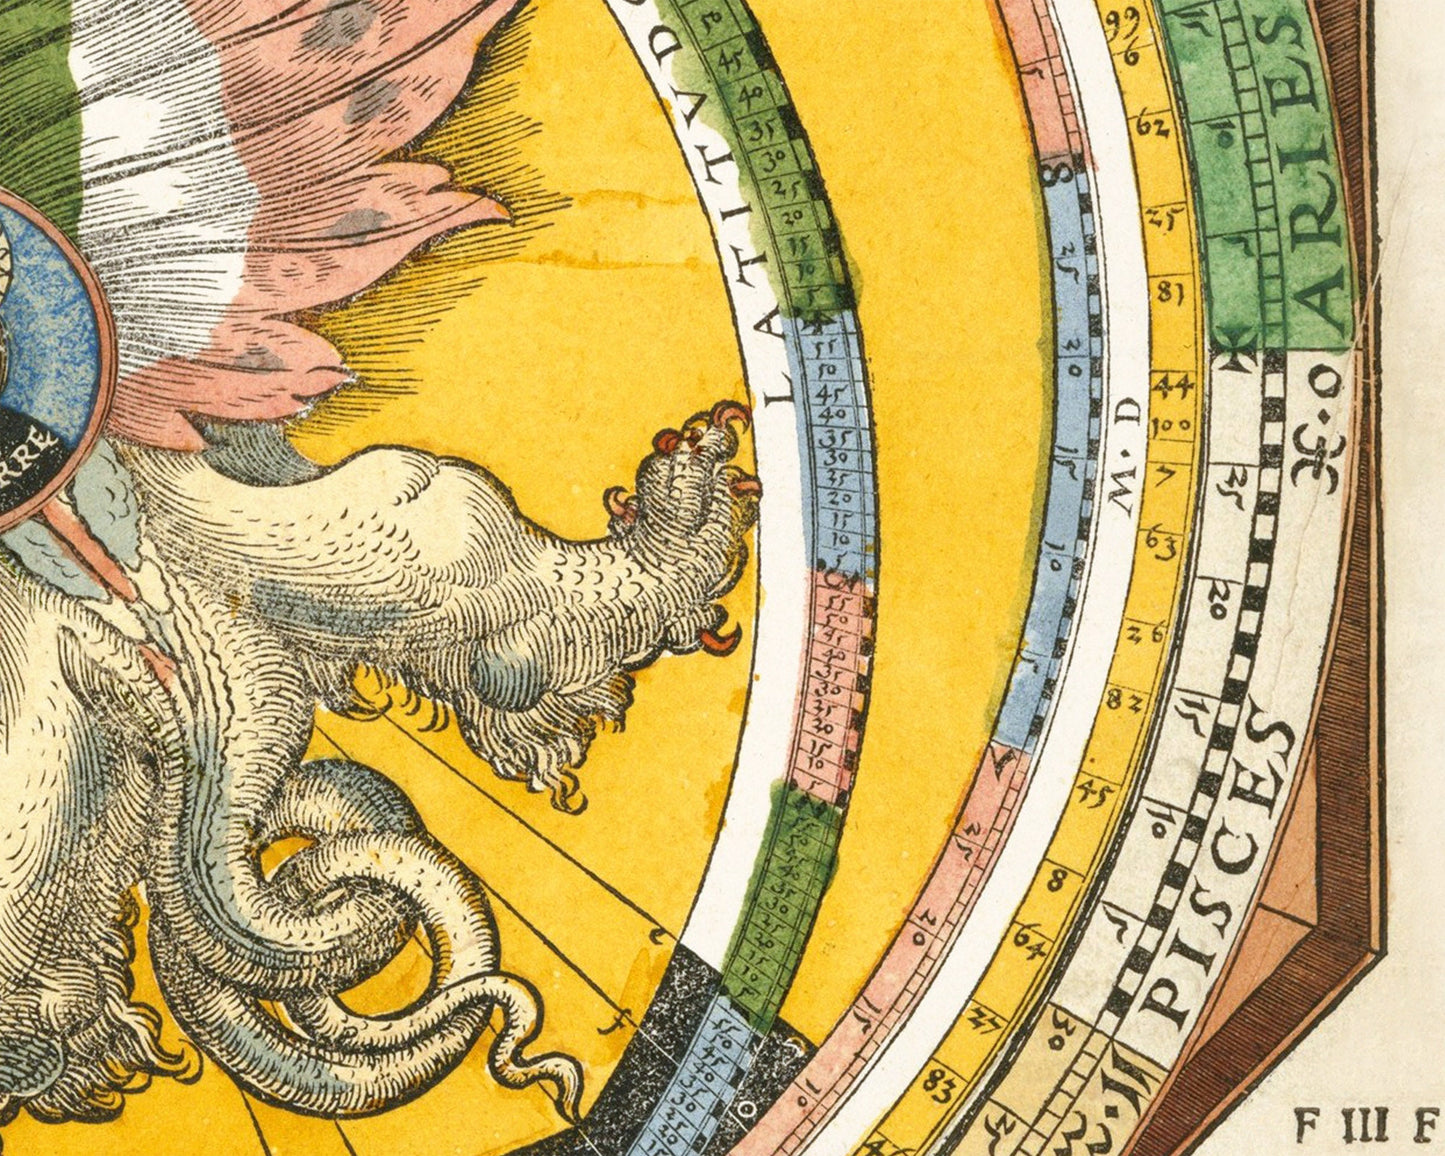 Antique Astronomy print | Astrolabe | 16th century astrology signs | Vintage dragon | Modern vintage décor | Eco-friendly gift